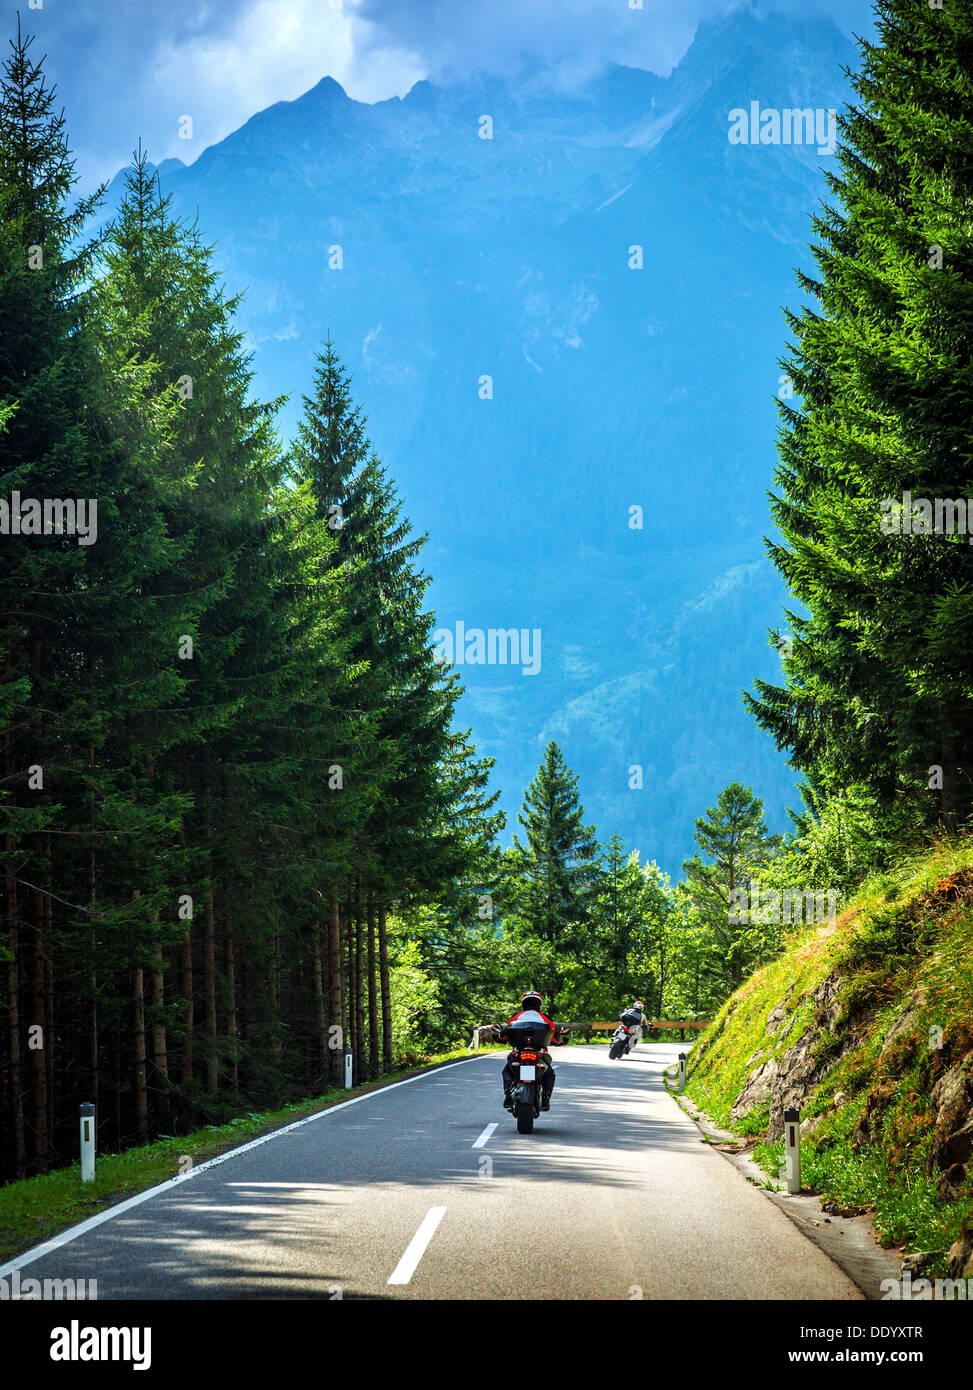 Bikers on the road in Alps, European tour, active lifestyle, driving motorcycle, enjoying freedom, summer holidays Stock Photo